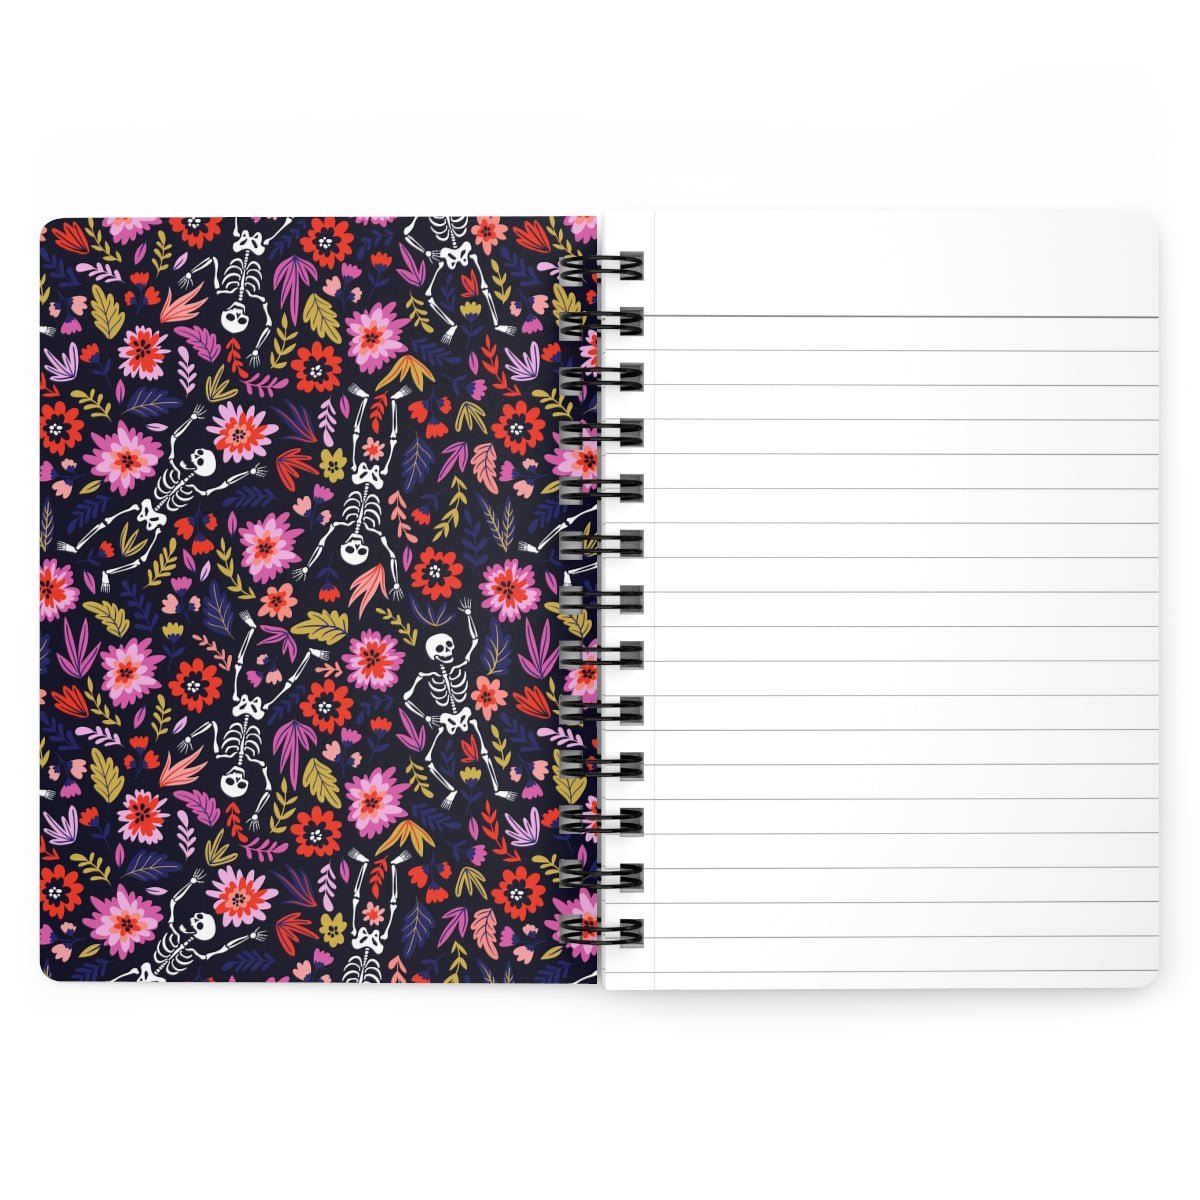 Dancing Skeletons Spiral Bound Journal - Puffin Lime